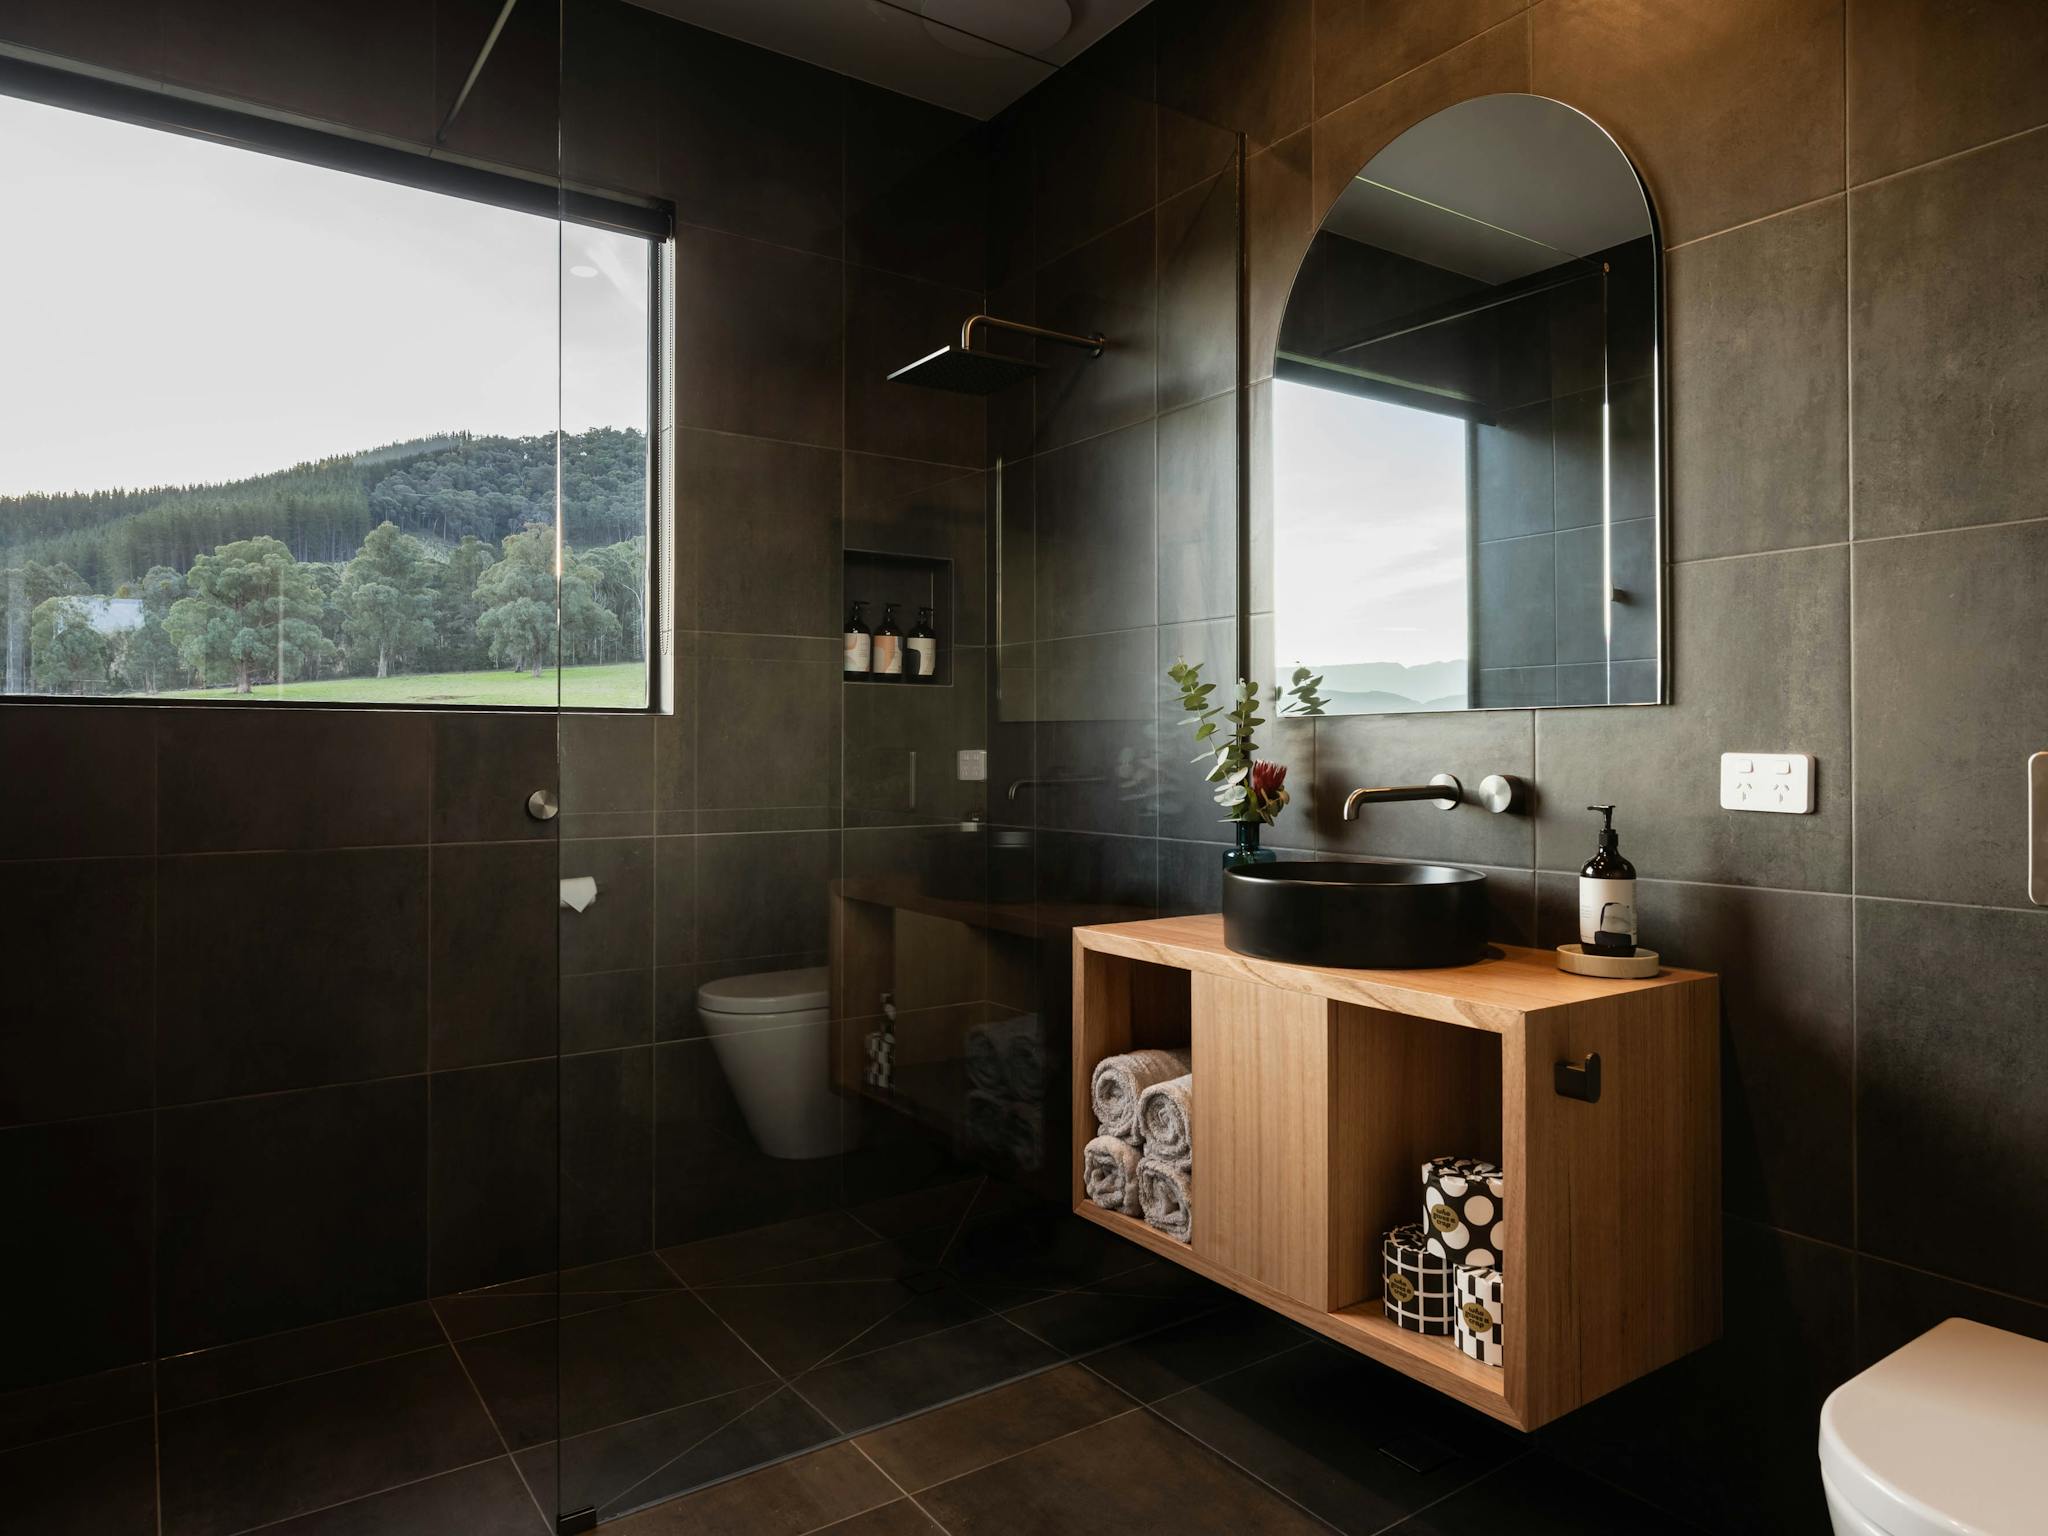 Bathroom with large window in shower with mountain views